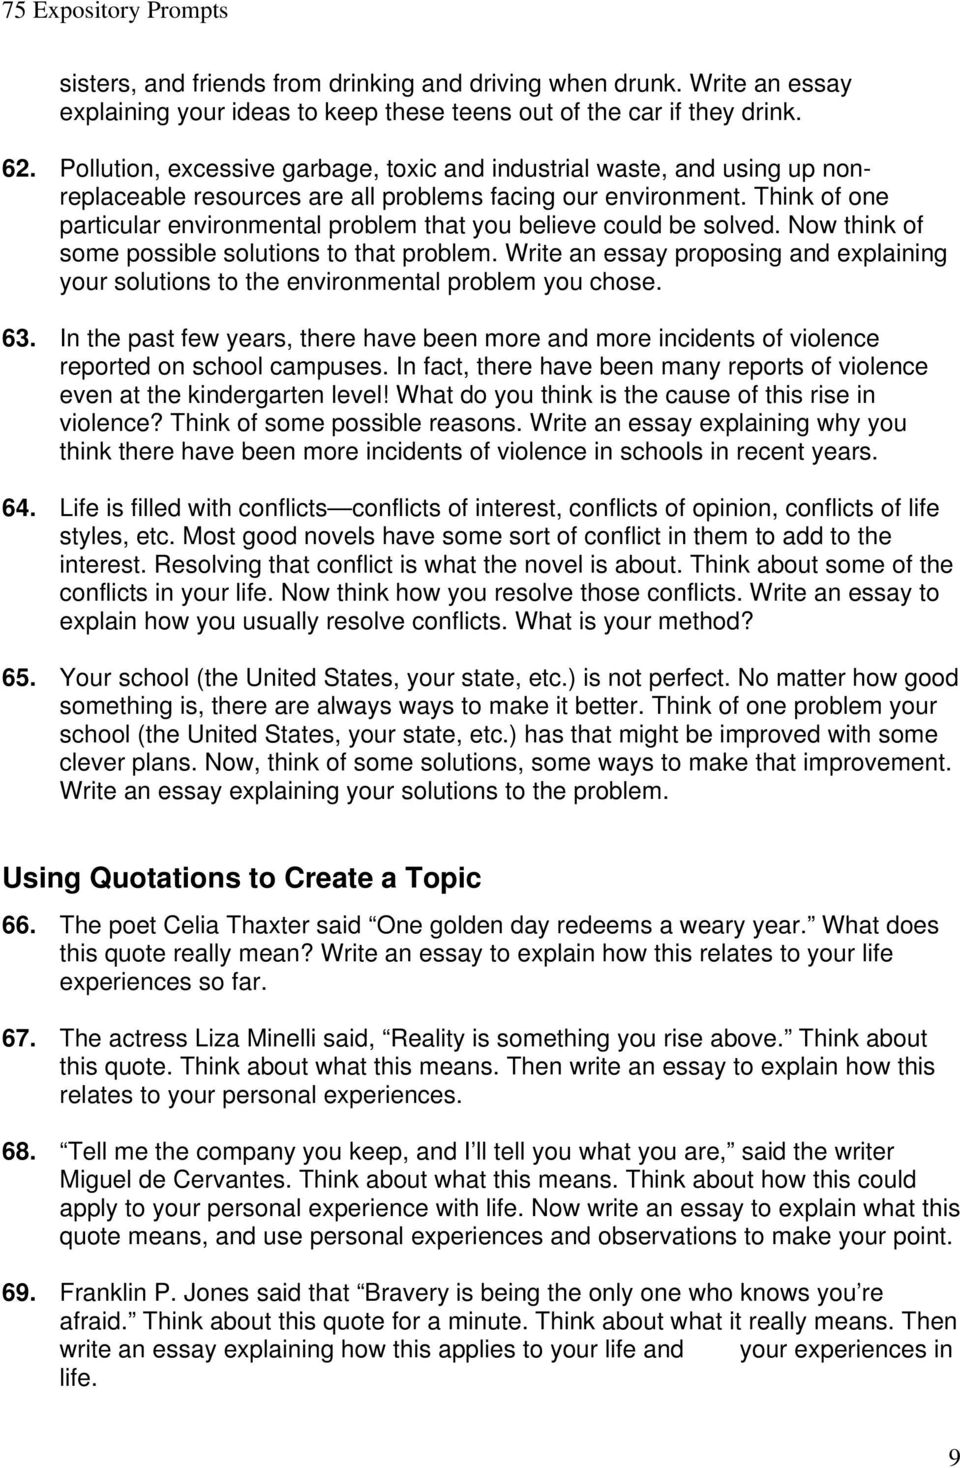 75 Expository Prompts Pdf Free Download